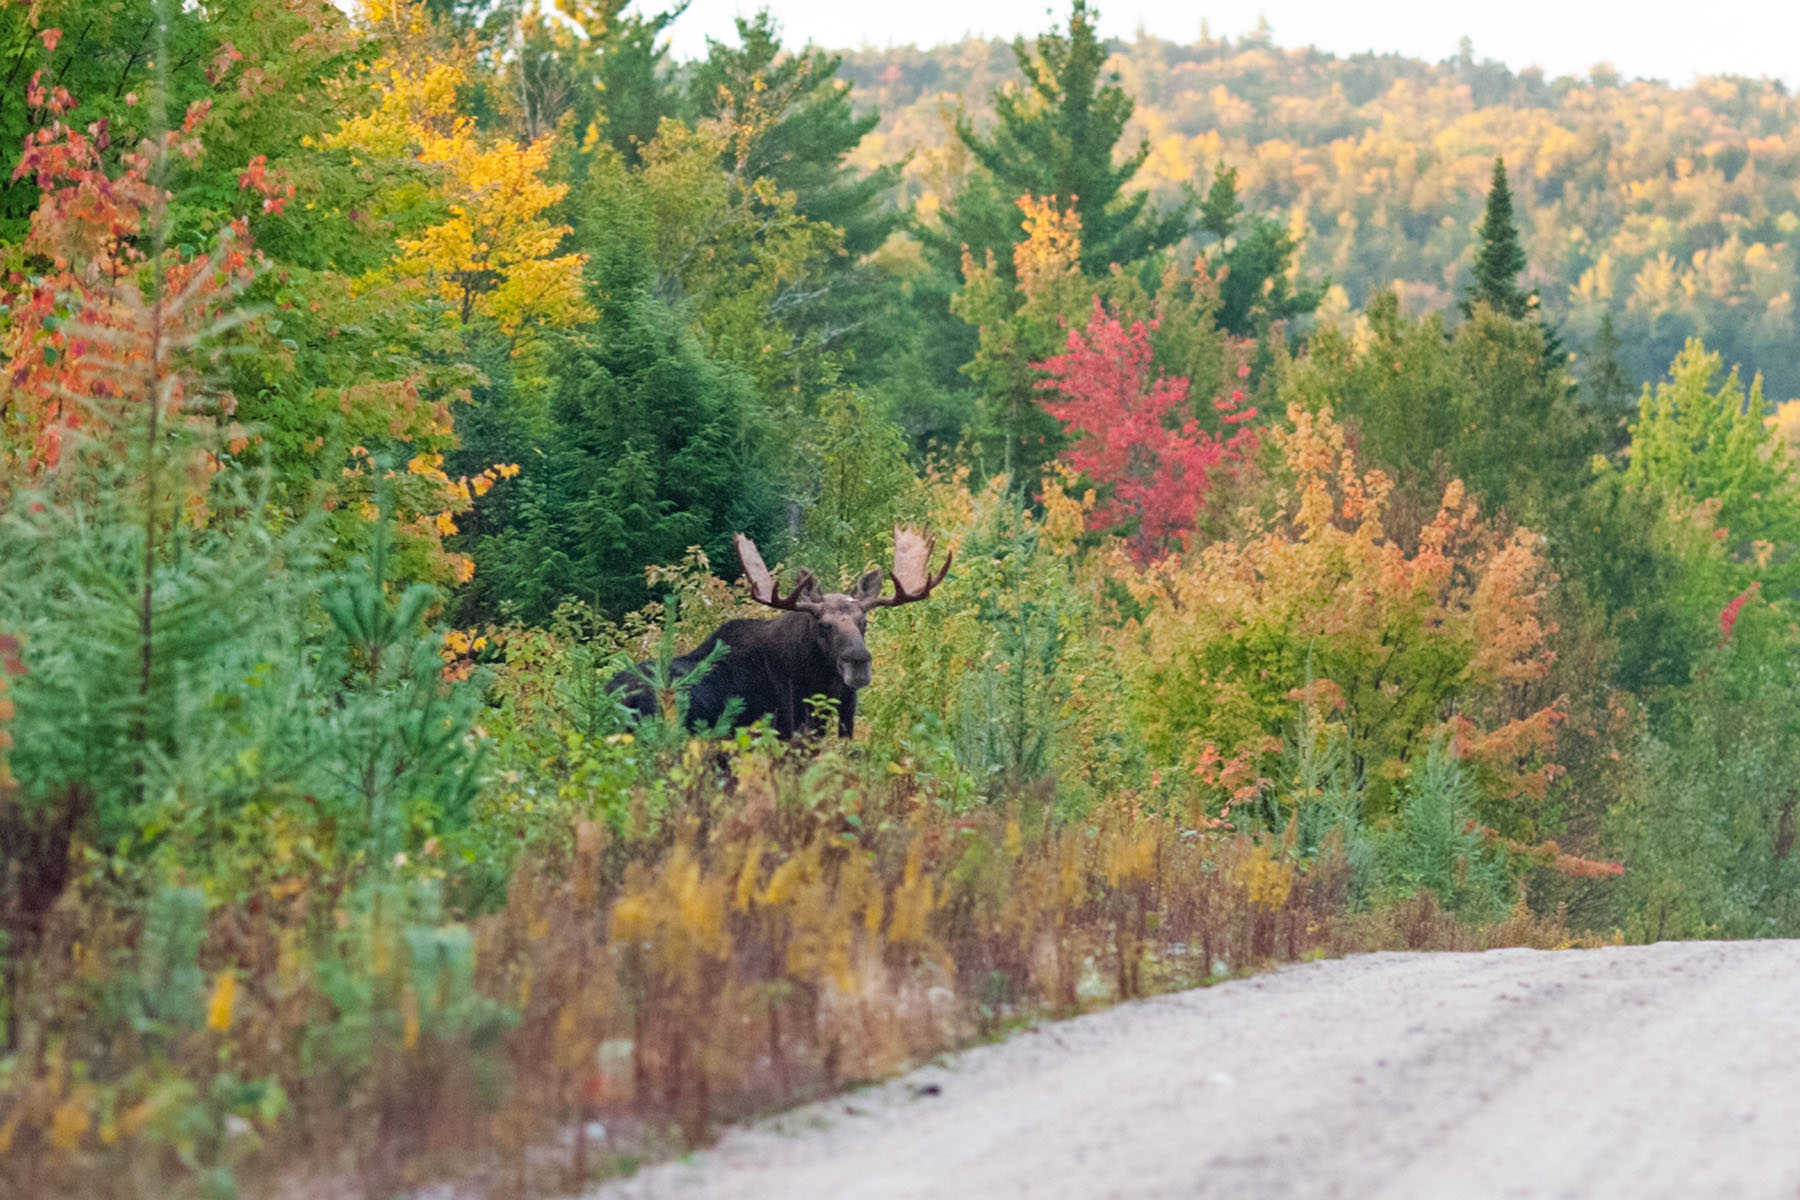 Moose, central Maine.  The only bull moose with antlers I saw on this trip.  Click for next photo.